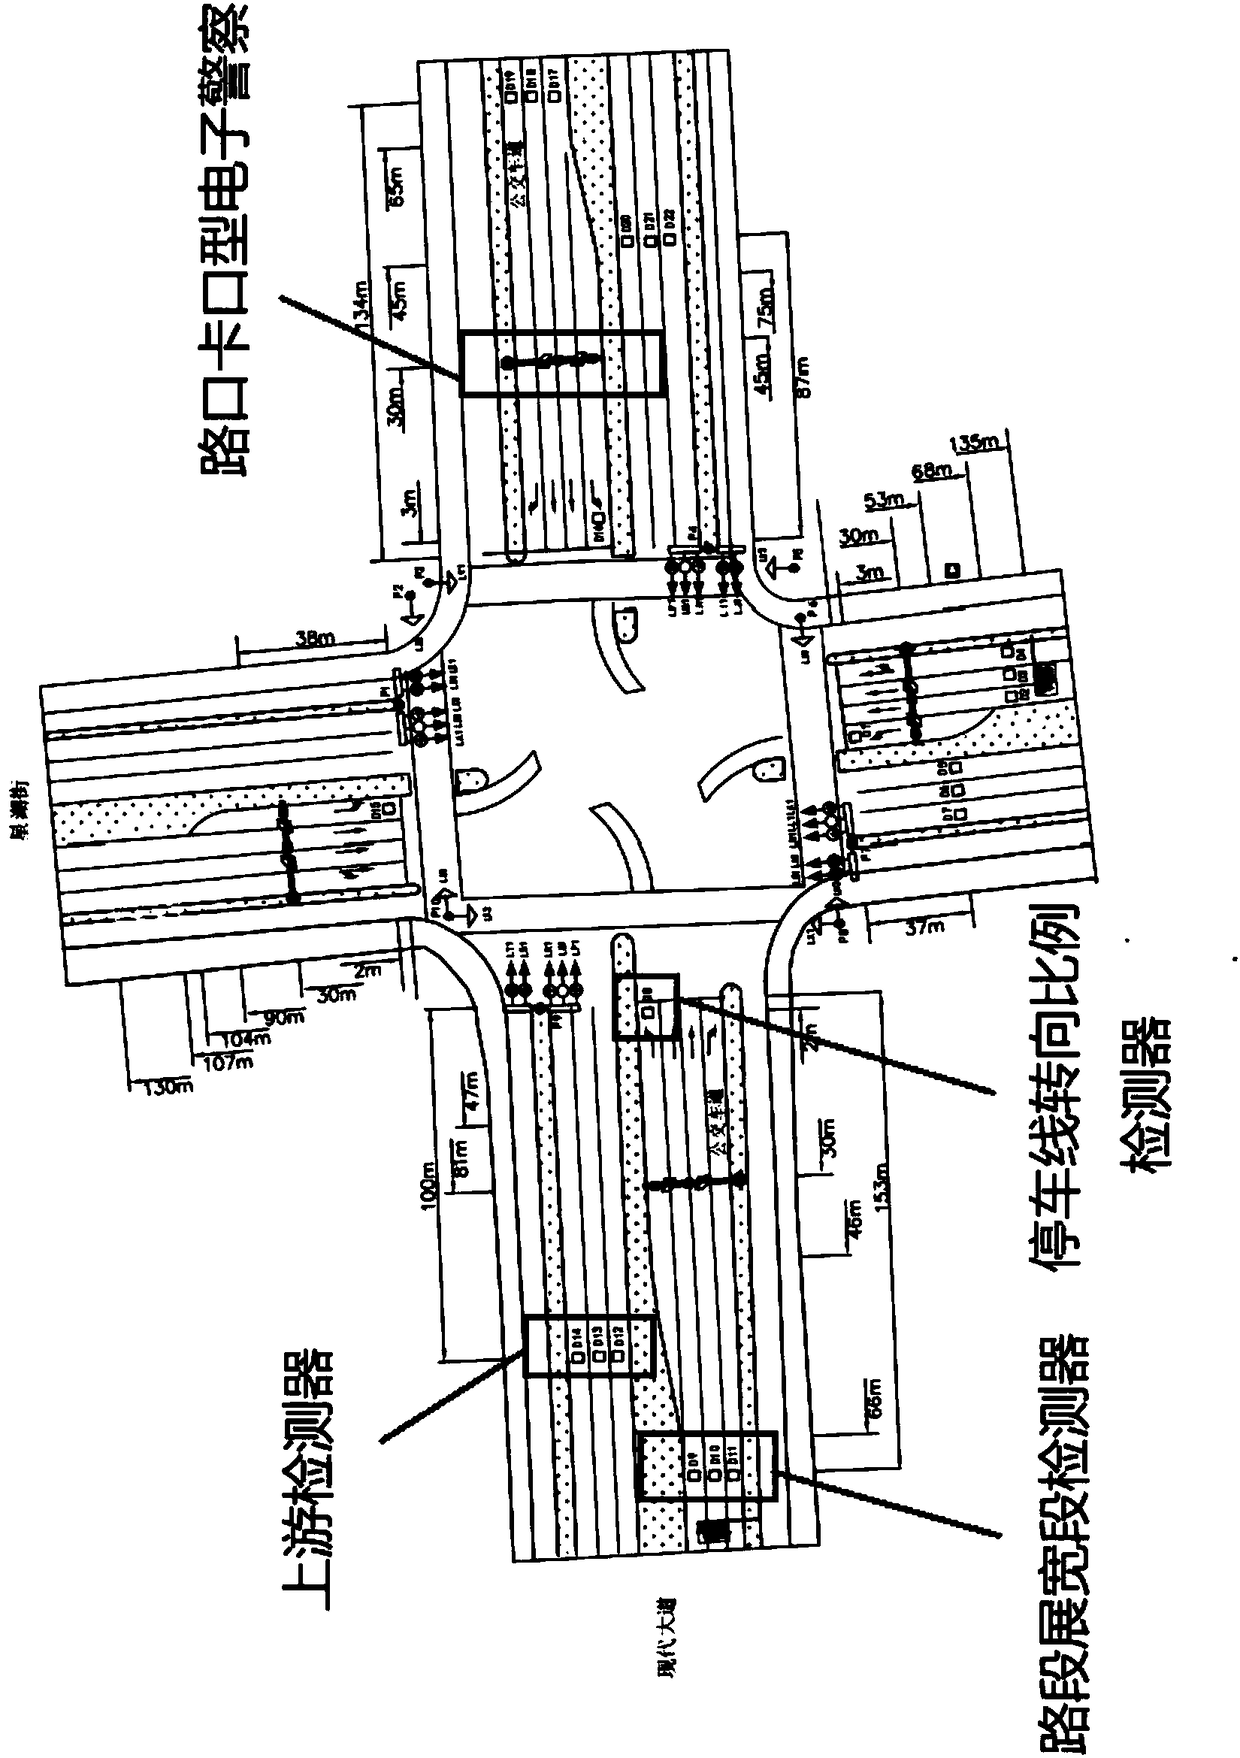 Single-intersection traffic signal control method based on secondary parking